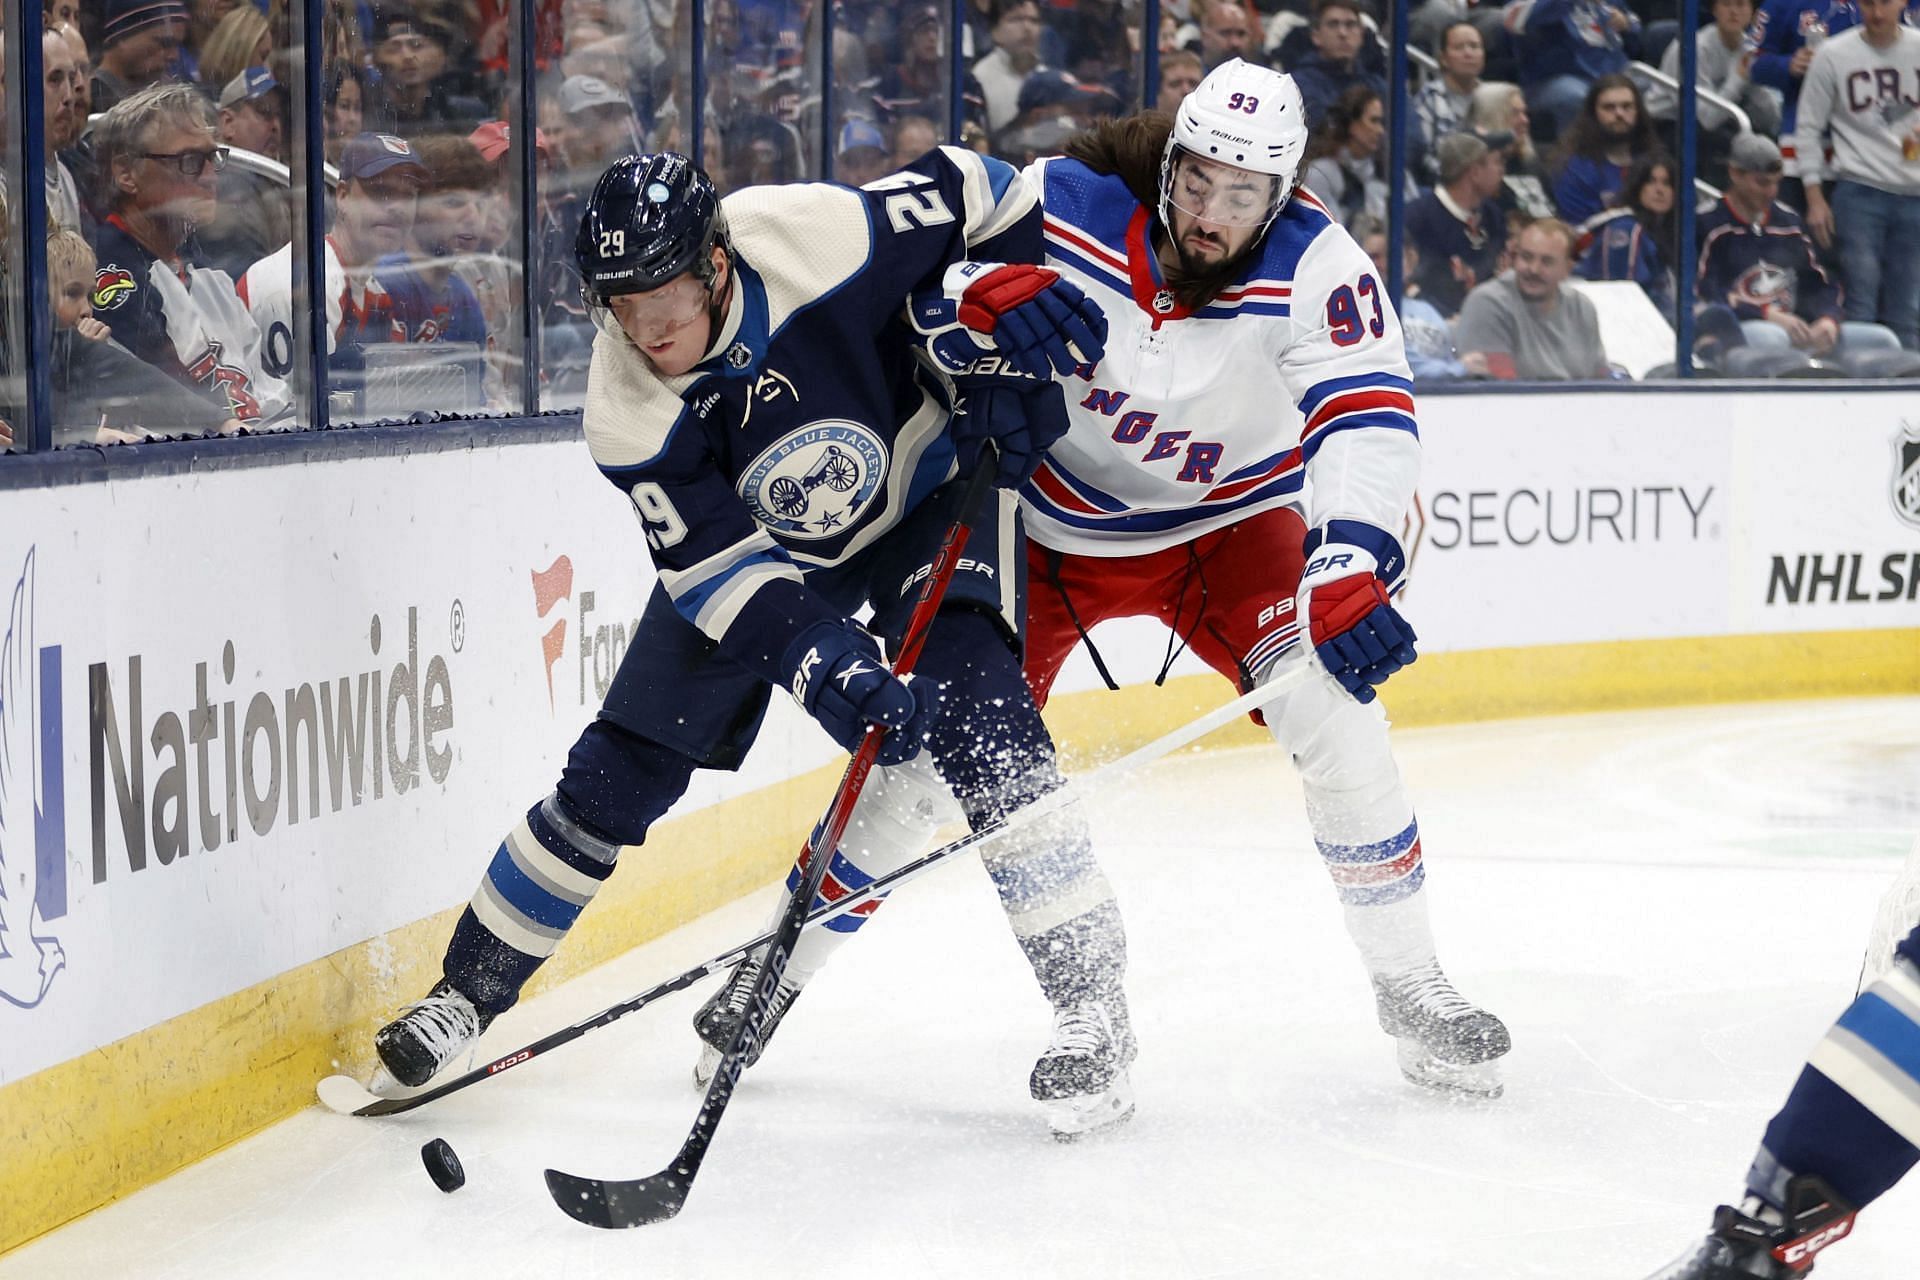 Columbus Blue Jackets forward Patrik Laine, left, chases the puck in front of New York Rangers forward Mika Zibanejad during the first period of an NHL hockey game in Columbus, Ohio, Oct. 14, 2023. (AP Photo/Paul Vernon)